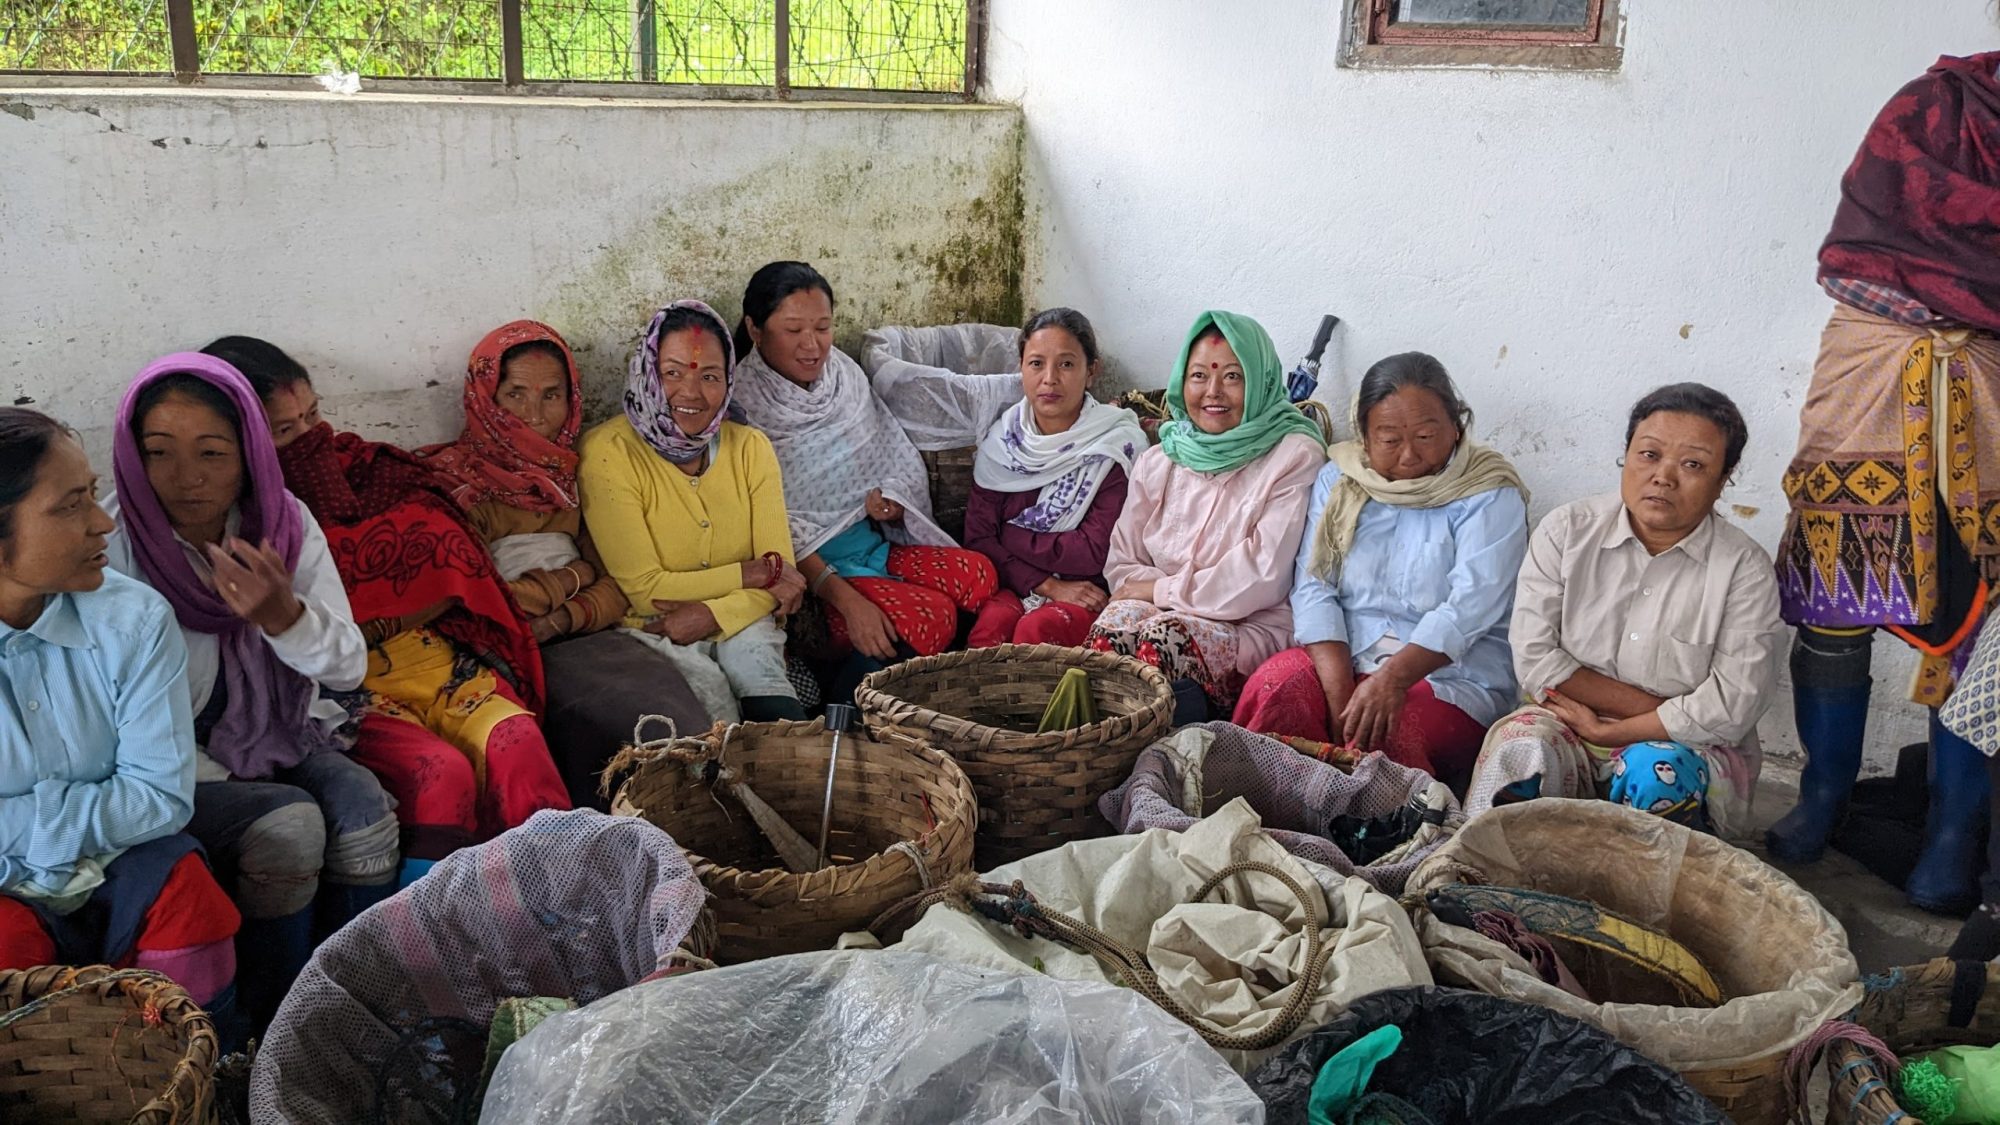 A group of women tea workers sit together around their tea baskets during a work stoppage at the Happy Valley Tea Estate in Darjeeling, India, on October 12, 2022.